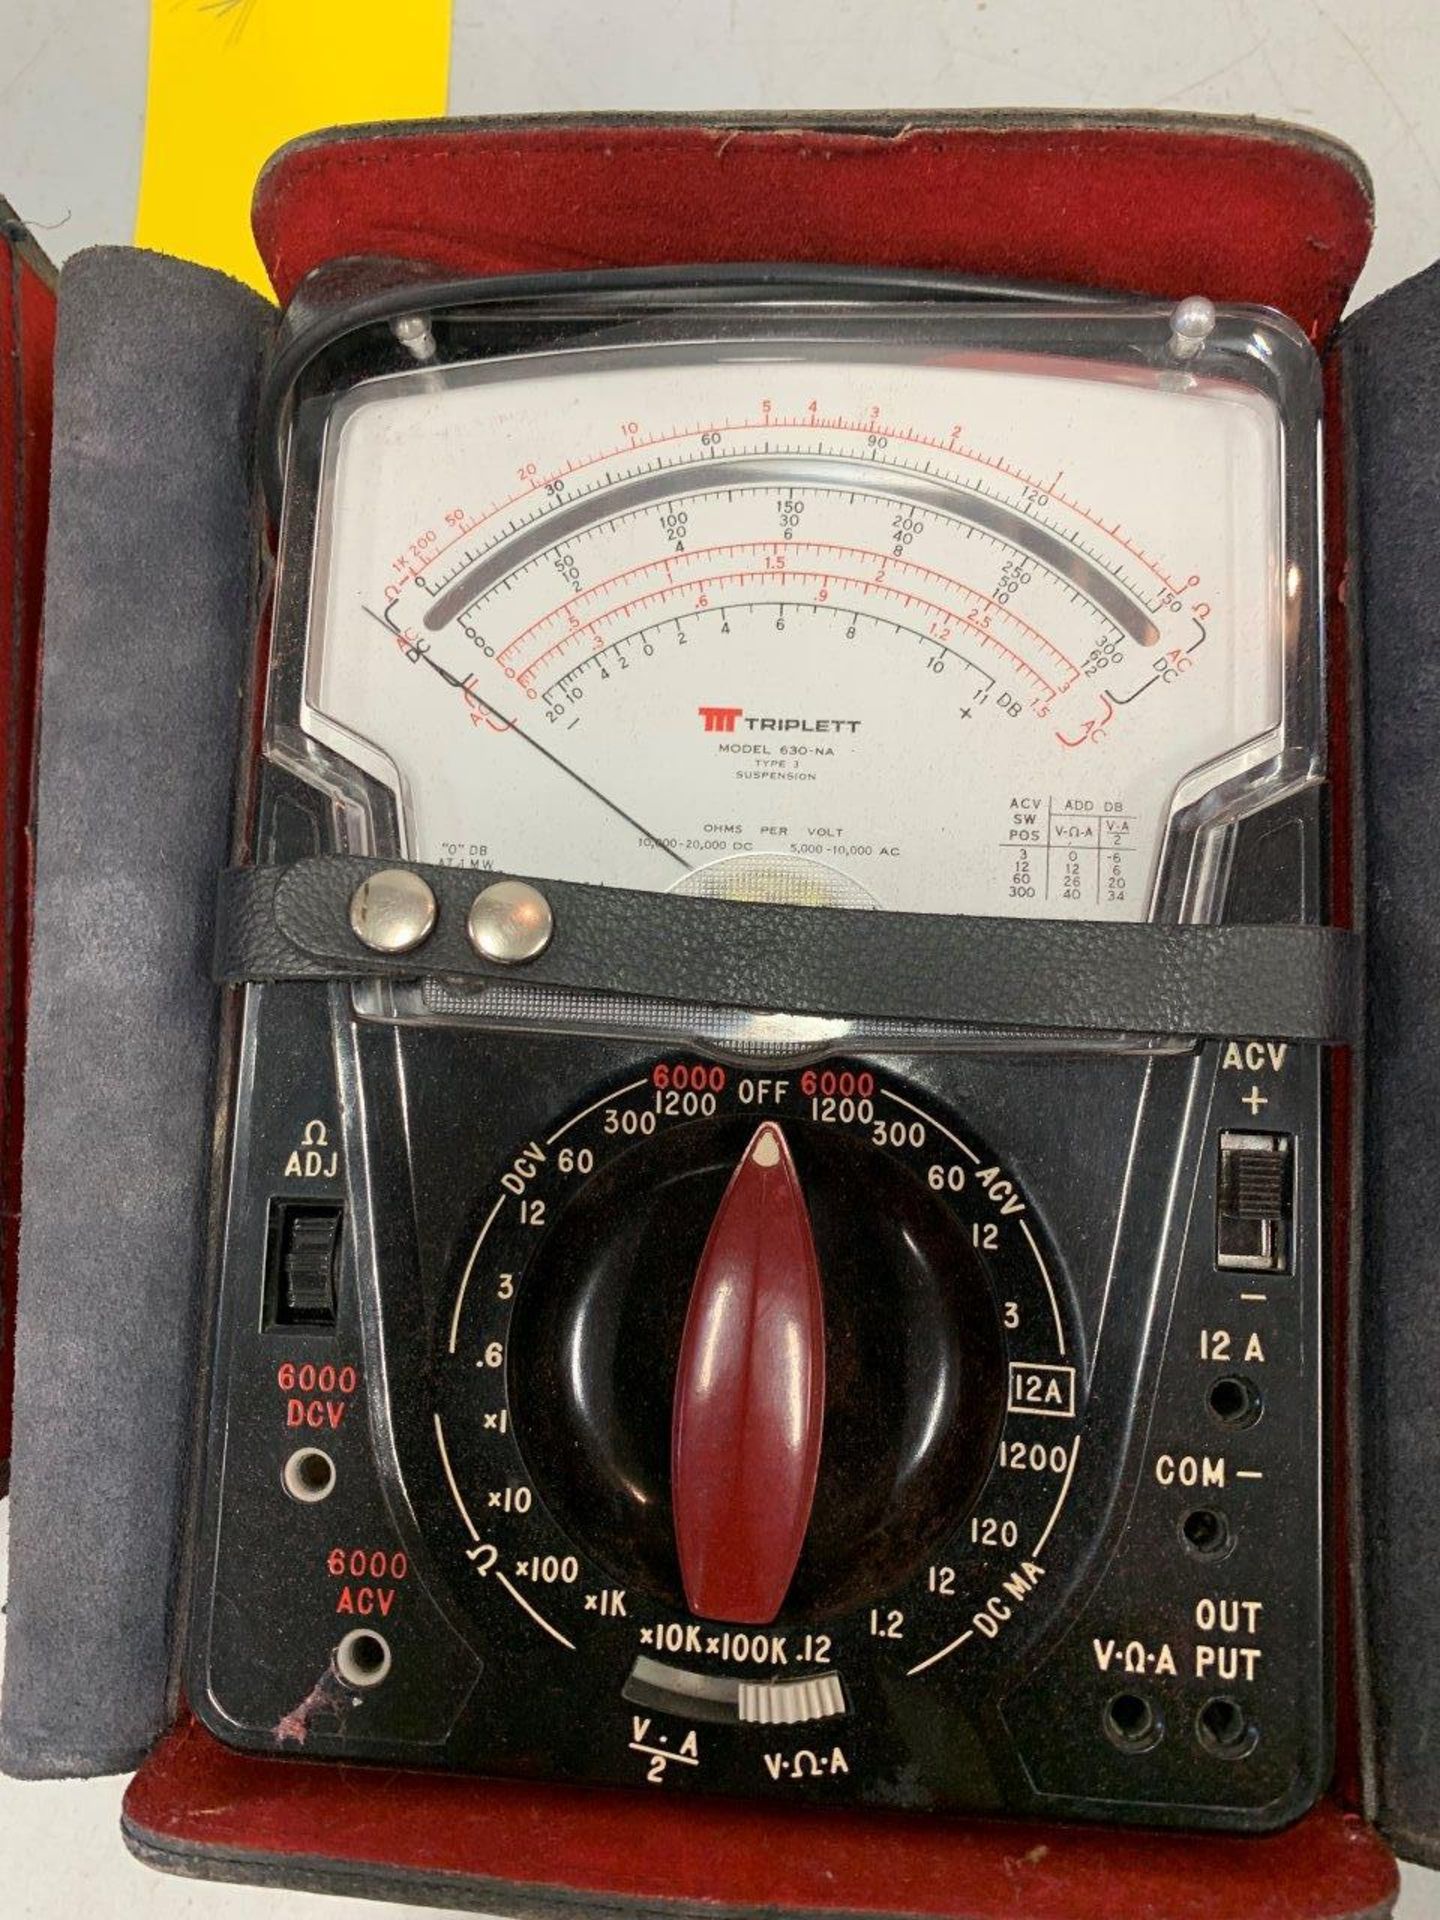 PAIR OF TRIPLETT MOD. 630-NA ELECTRICAL TESTER - Image 3 of 3